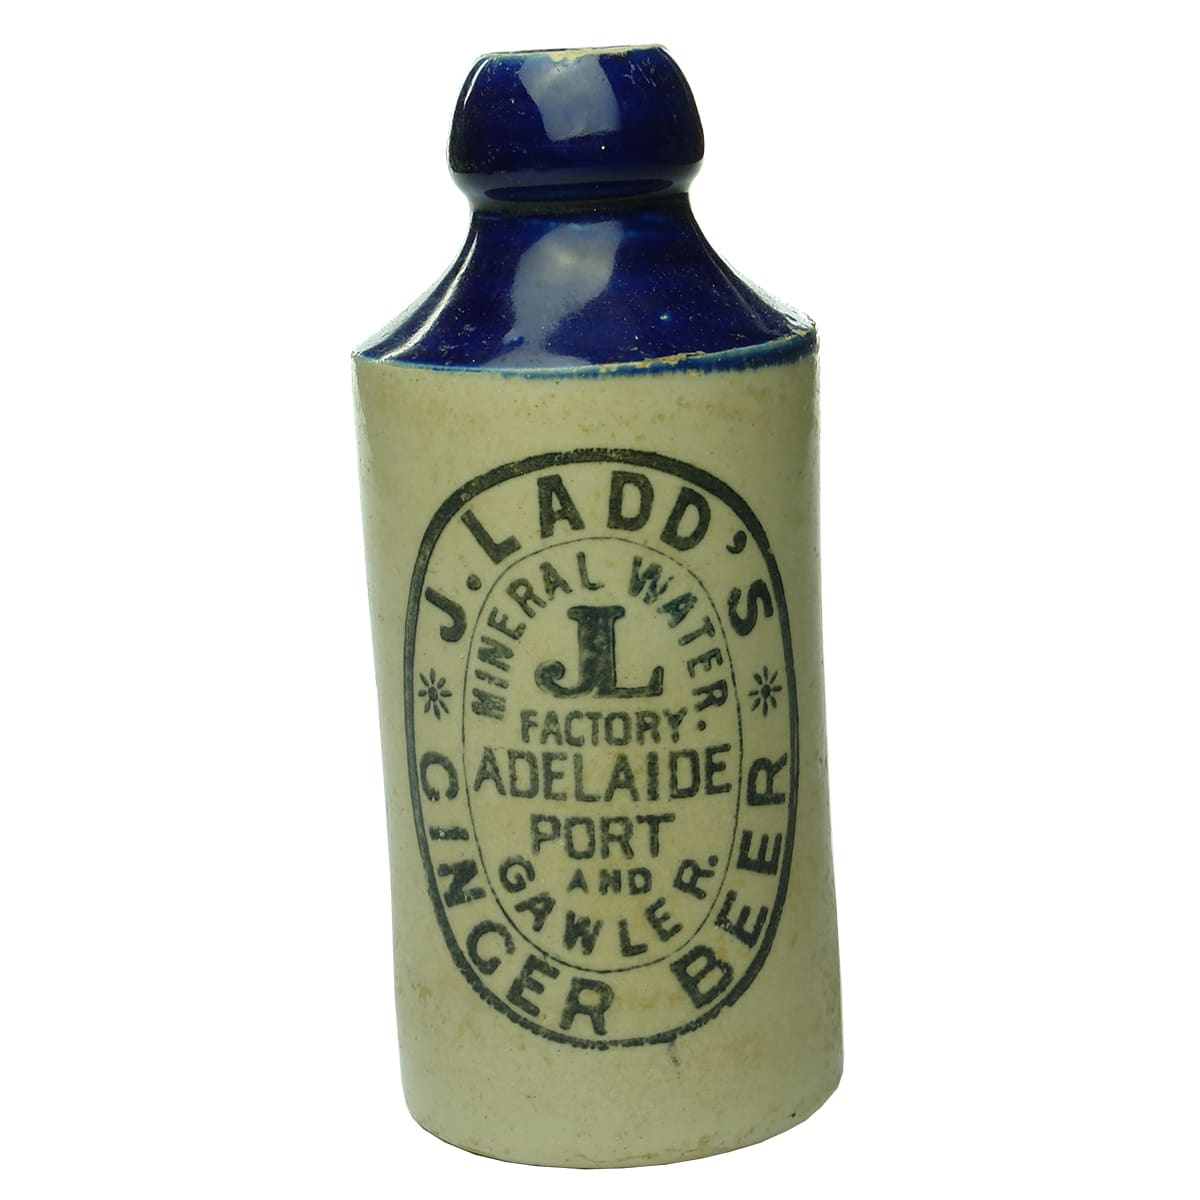 Ginger Beer. J. Ladd's, Adelaide, Port and Gawler. Cork stopper. Blue Top. Fowler. 10 oz.